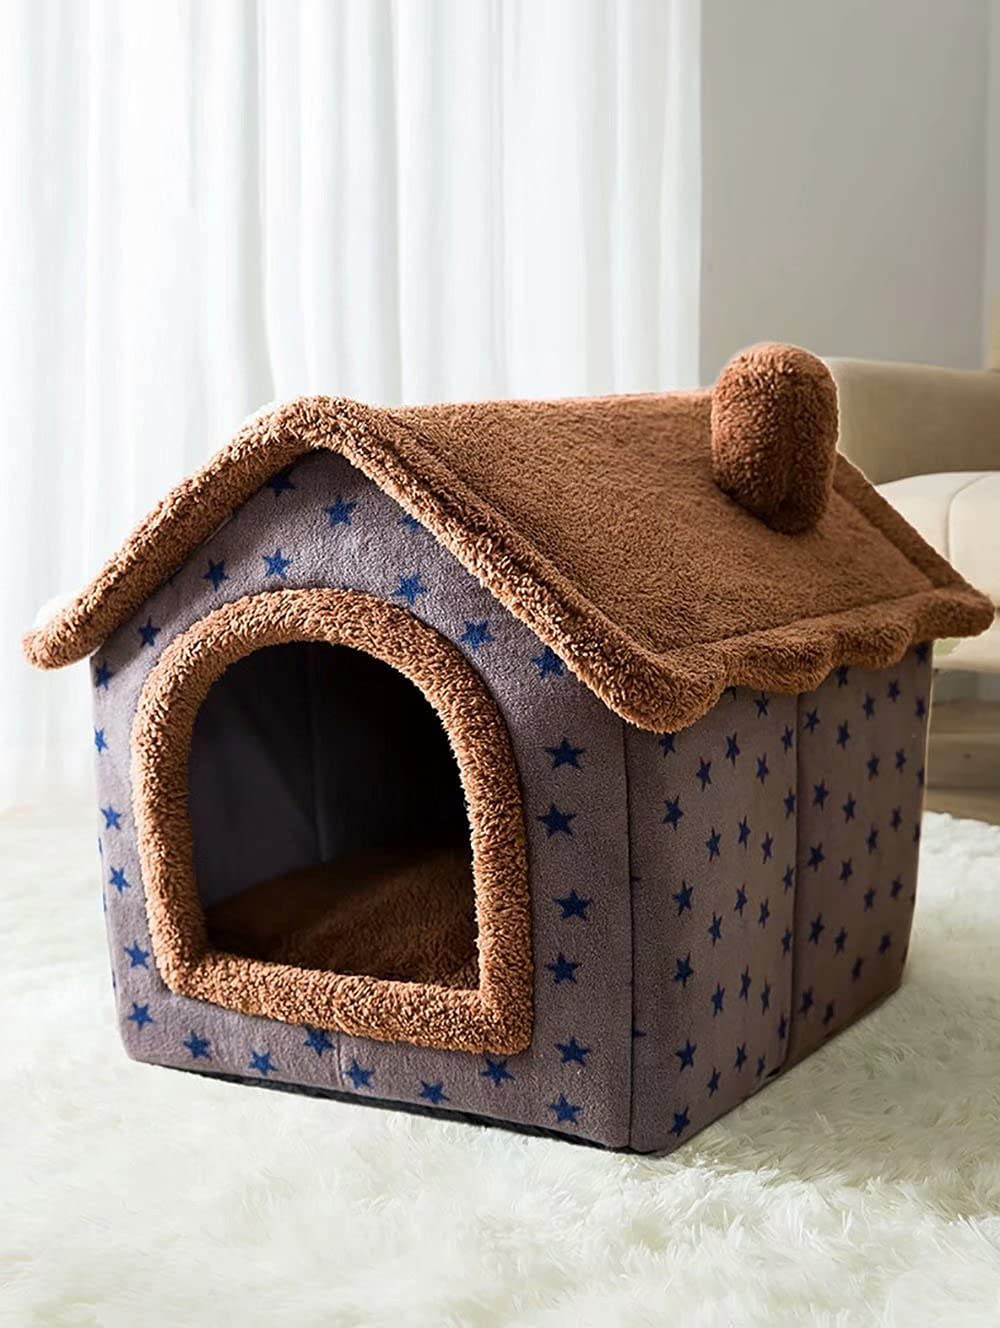 Dog House Kennel Soft Pet Bed Tent Indoor Enclosed Warm Plush Sleeping Nest Basket with Removable Cushion Travel Dog Accessory Coffee Animals & Pet Supplies > Pet Supplies > Dog Supplies > Dog Houses Petpany Coffee Dog 4 S 15.4x14.2x13.4 inch 